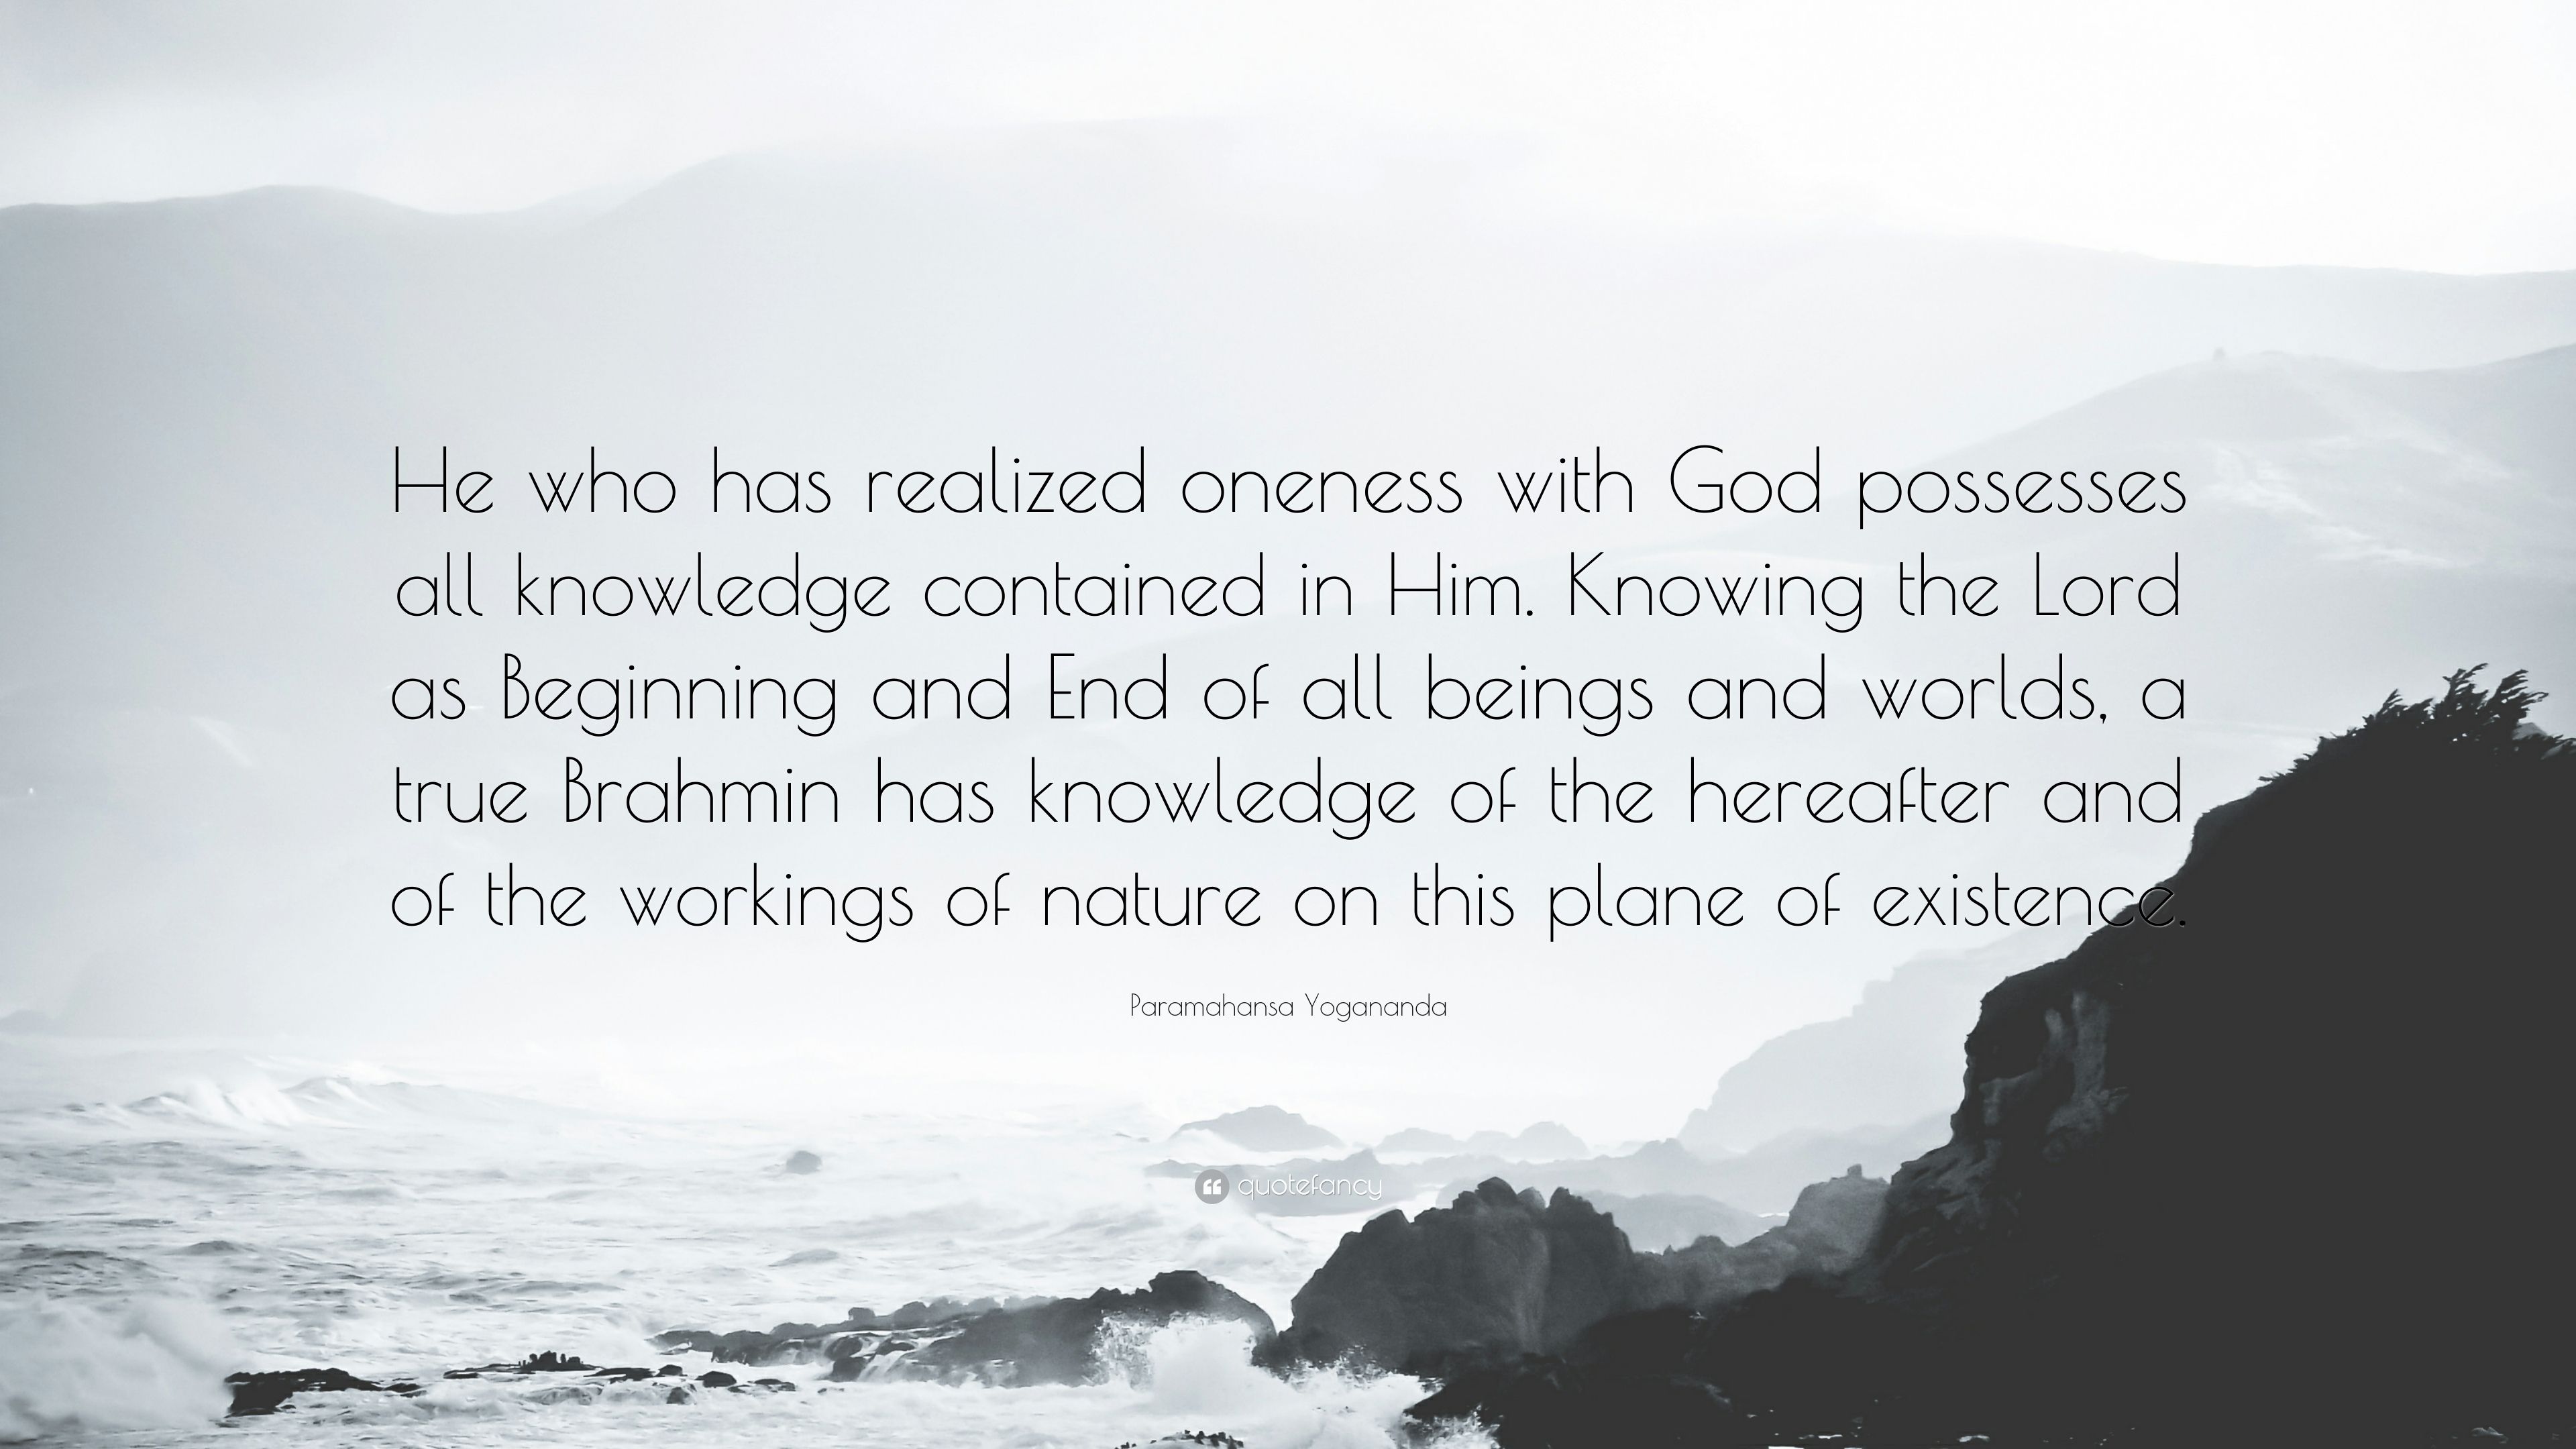 Paramahansa Yogananda Quote: “He who has realized oneness with God possesses all knowledge contained in Him. Knowing the Lord as Beginning and End” (12 wallpaper)